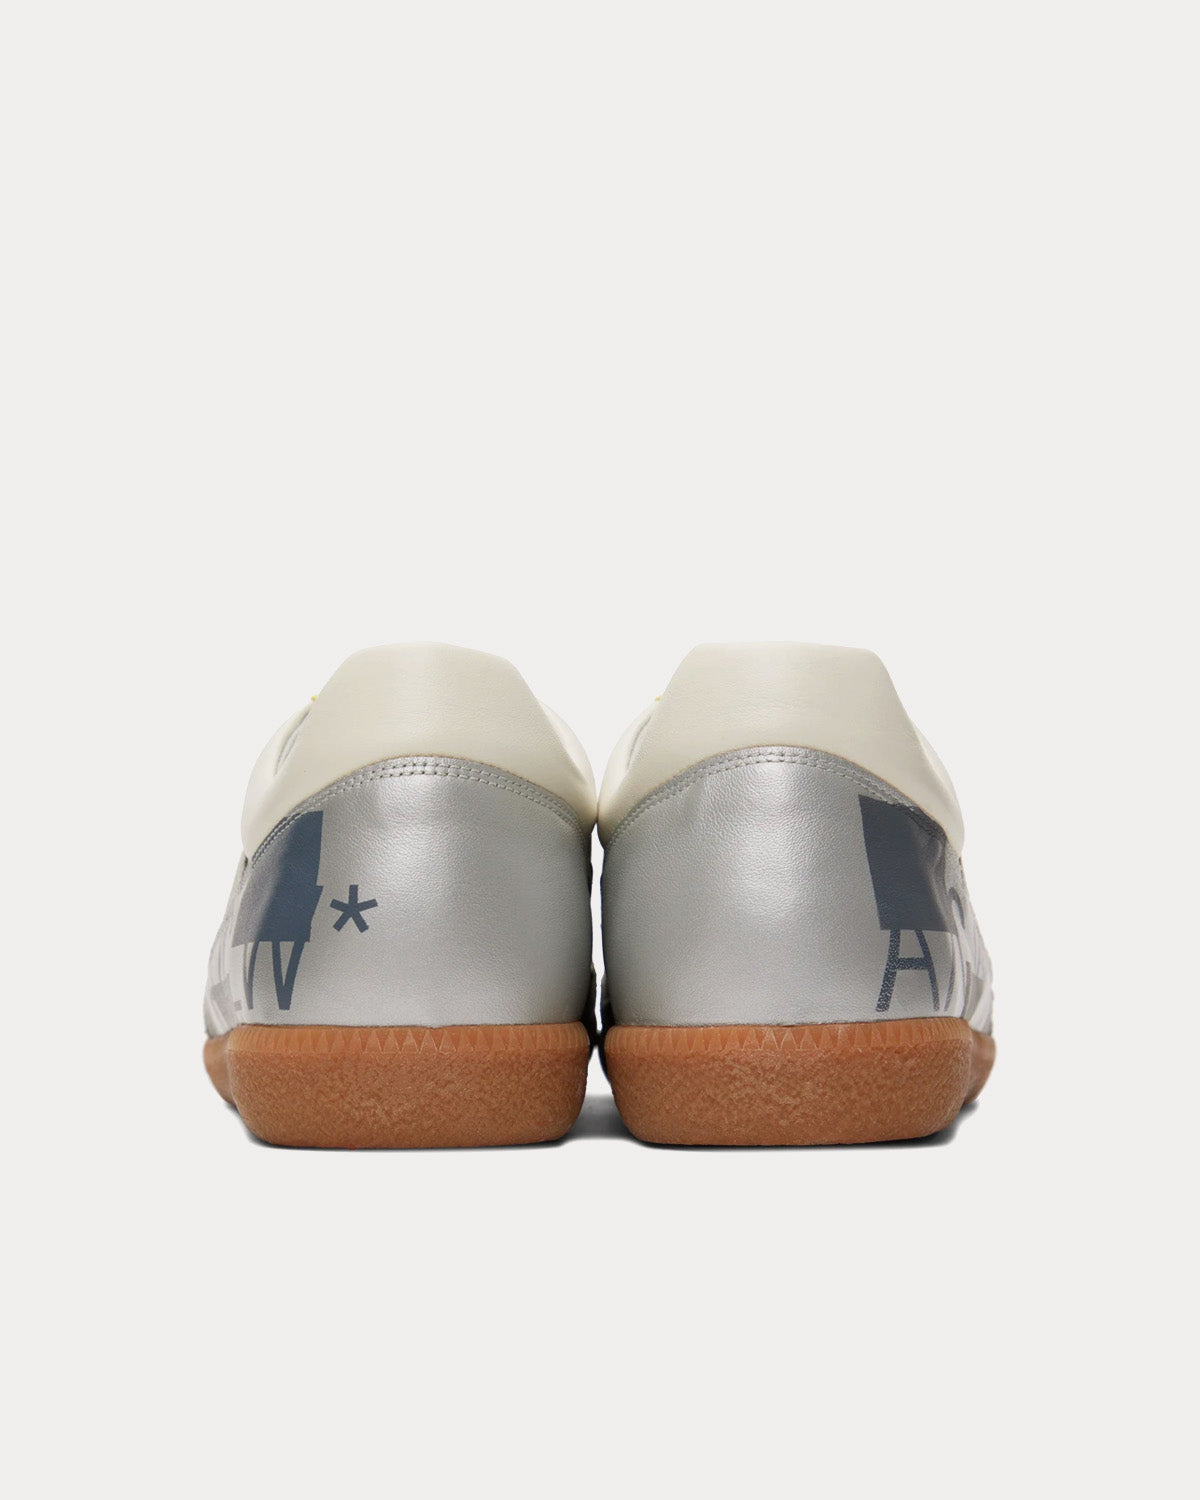 A-COLD-WALL* - Shard Track Off-White / Silver Low Top Sneakers